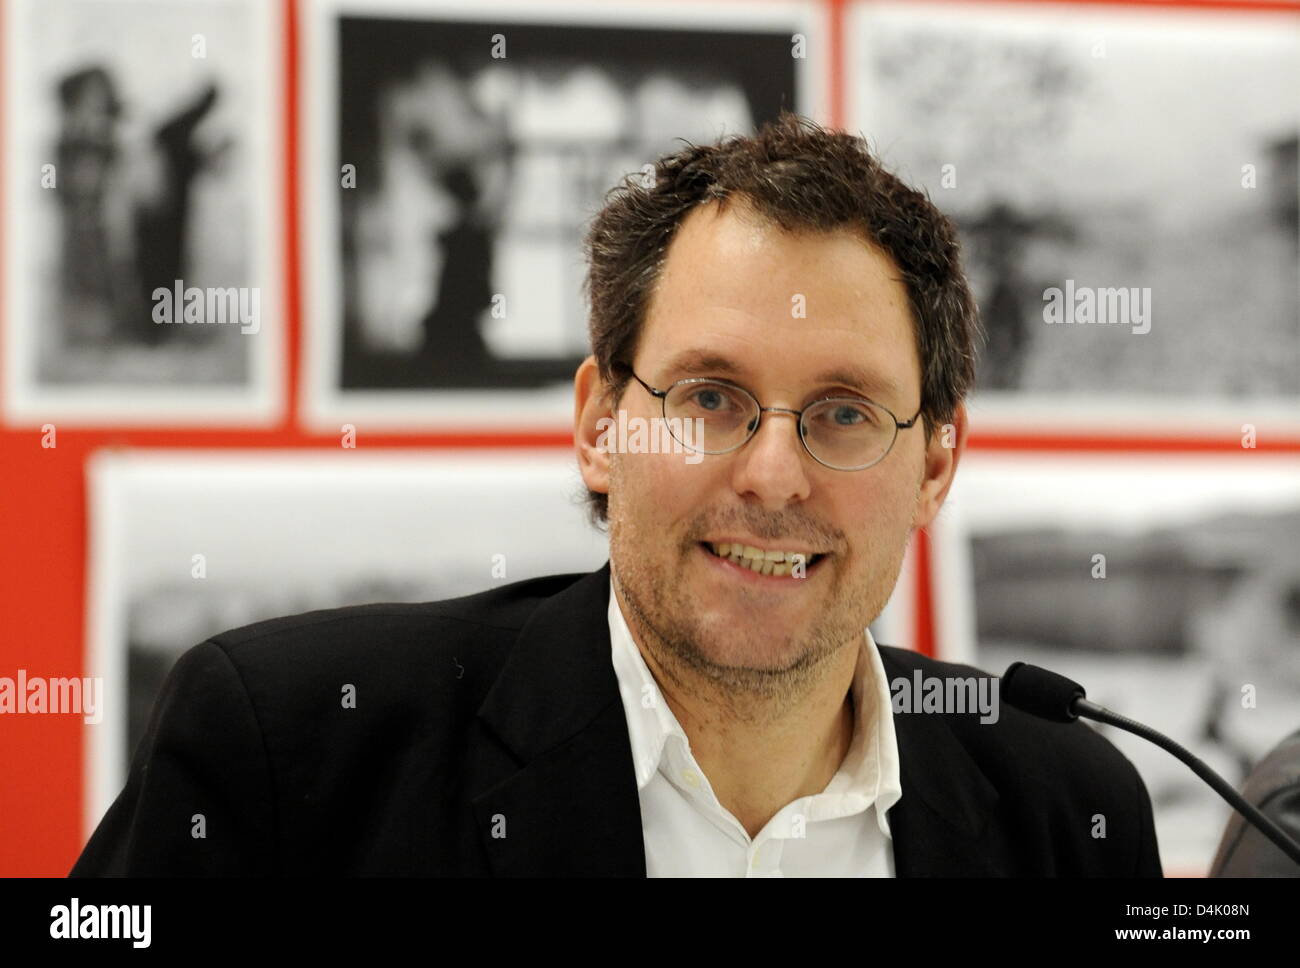 Ingo Traubhorn, curator of the exhibition ?VisualLeader? speaks at a press conference on the exhibition in Hamburg, Germany, 13 March 2009. Outstanding worksk of print and online media will be presented in the exhibition at Hamburg?s ?Deichtorhallen?. The photo series, magazine articles, advertisements and websites - all on the shortlist for the Lead Awards - will be on display jus Stock Photo